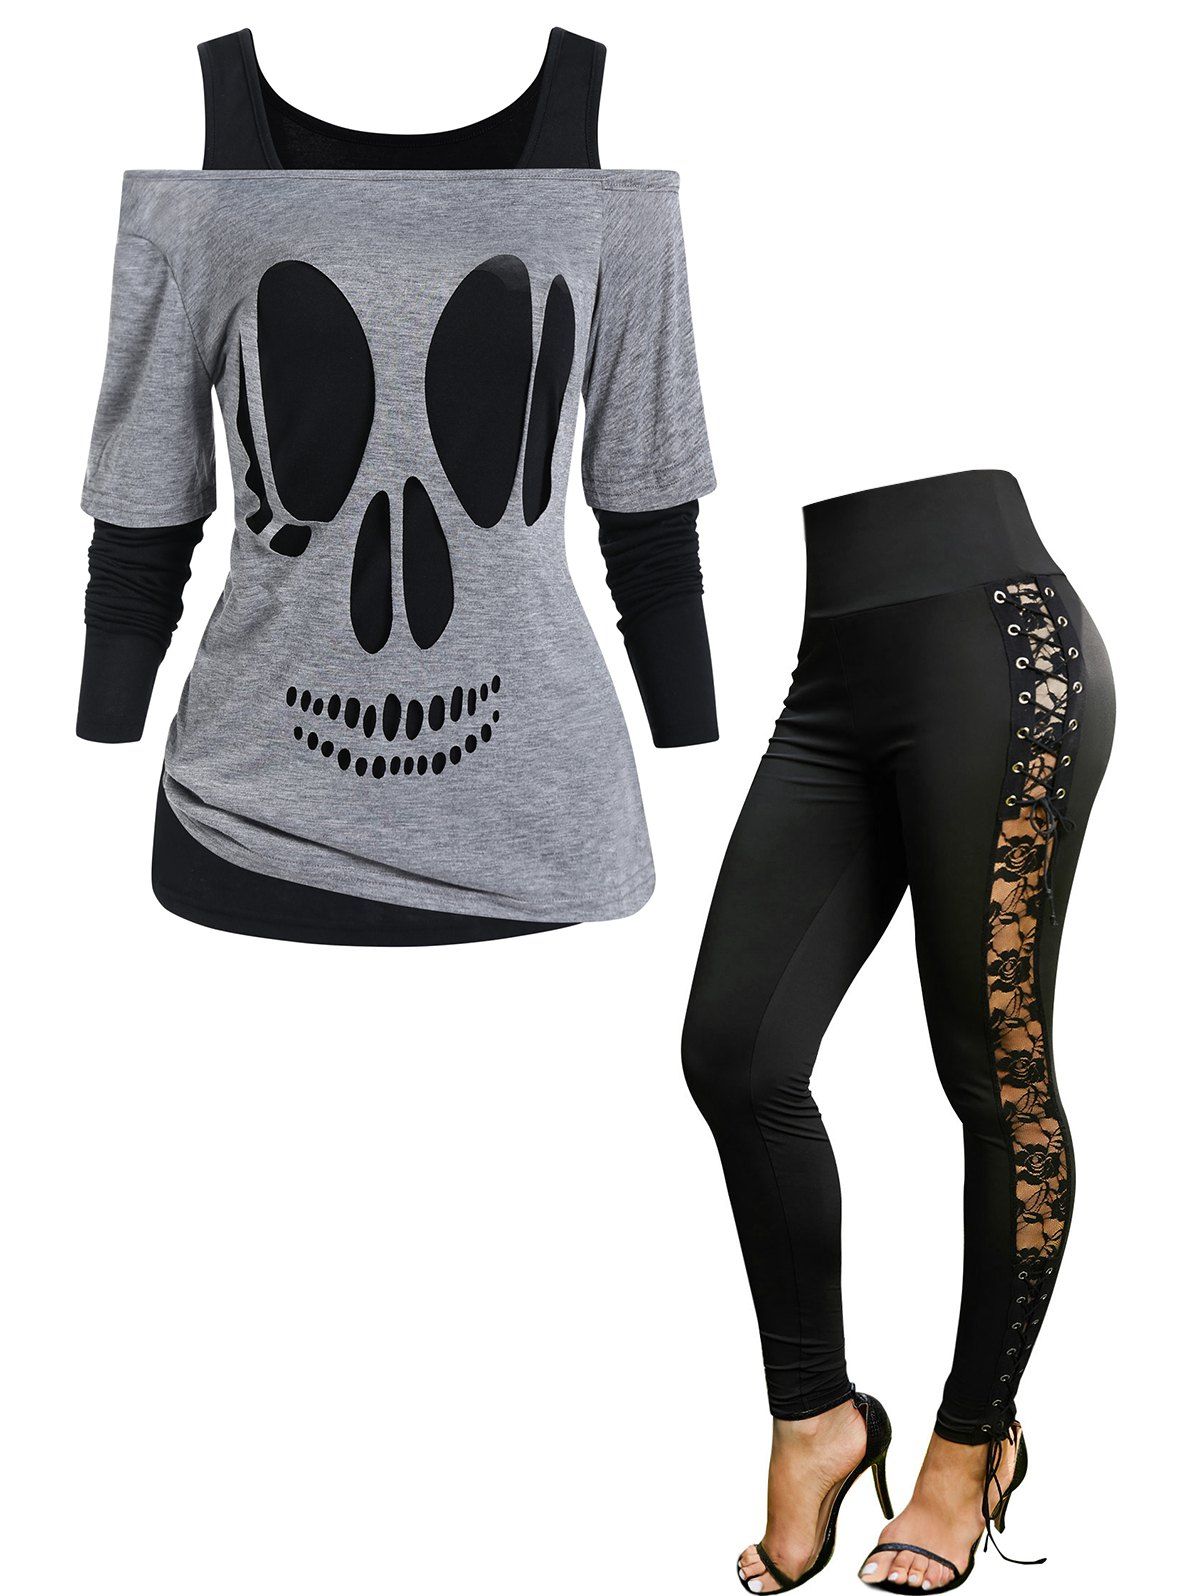 Off The Shoulder Skull Cut Out Top Cold Shoulder Long Sleeve T-shirt And Floral Lace Panel Lace Up Leggings Outfit - multicolor S